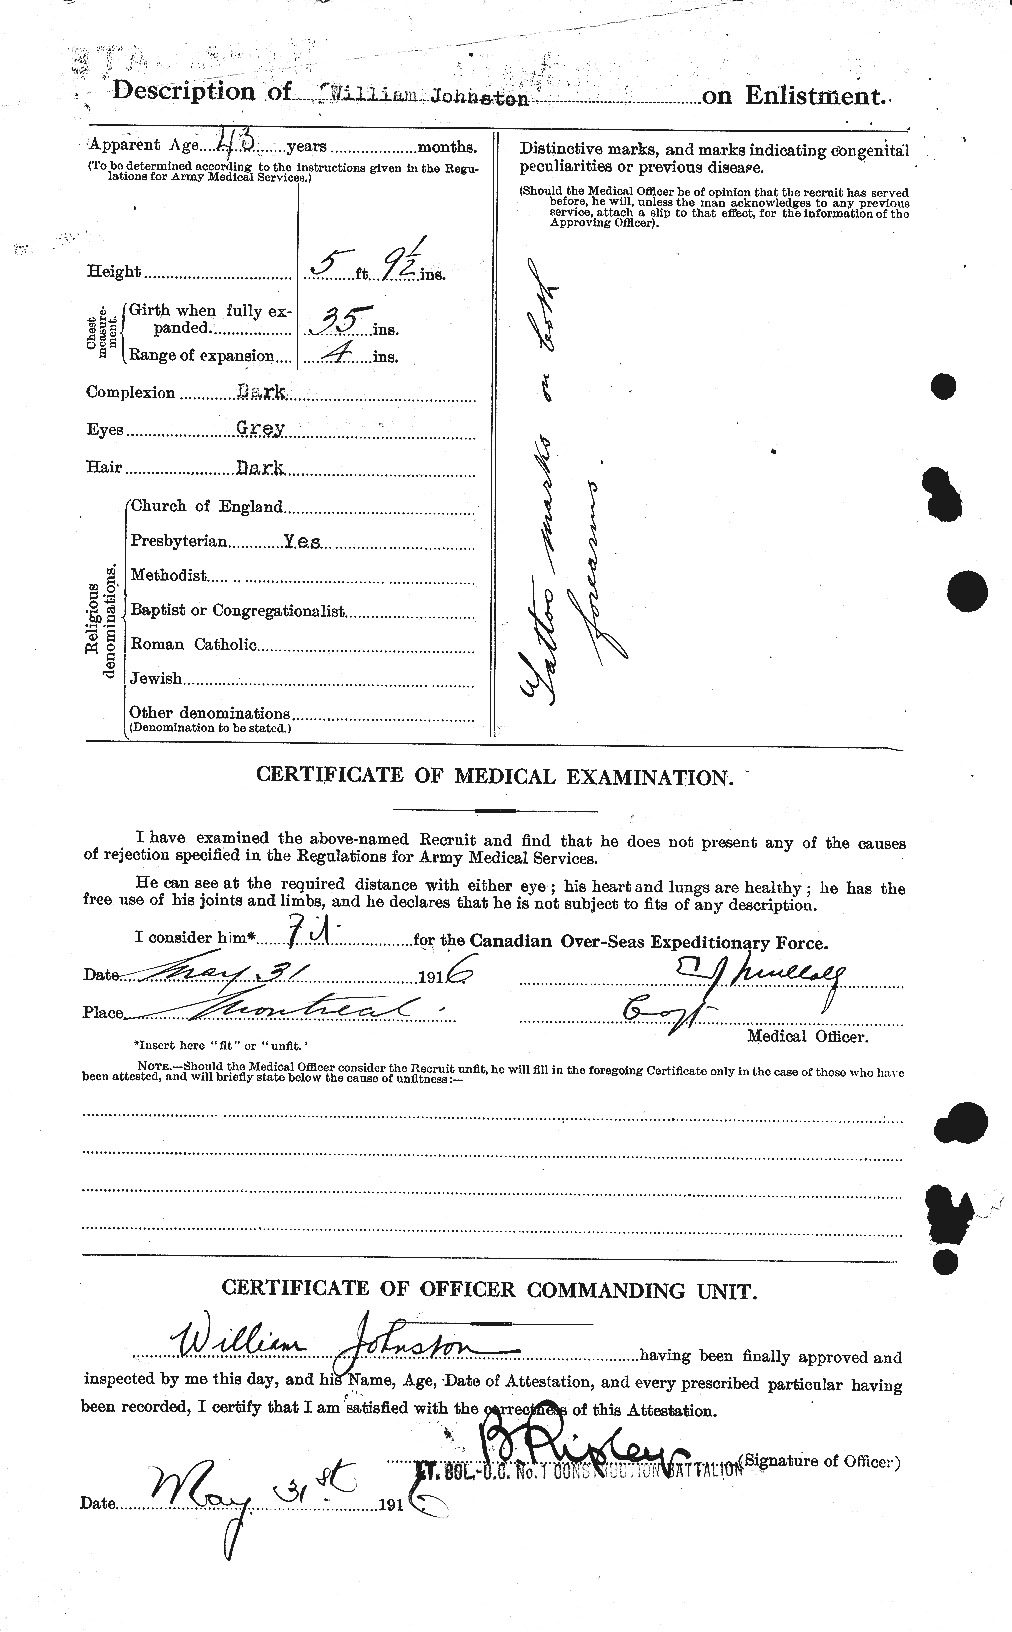 Personnel Records of the First World War - CEF 427235b